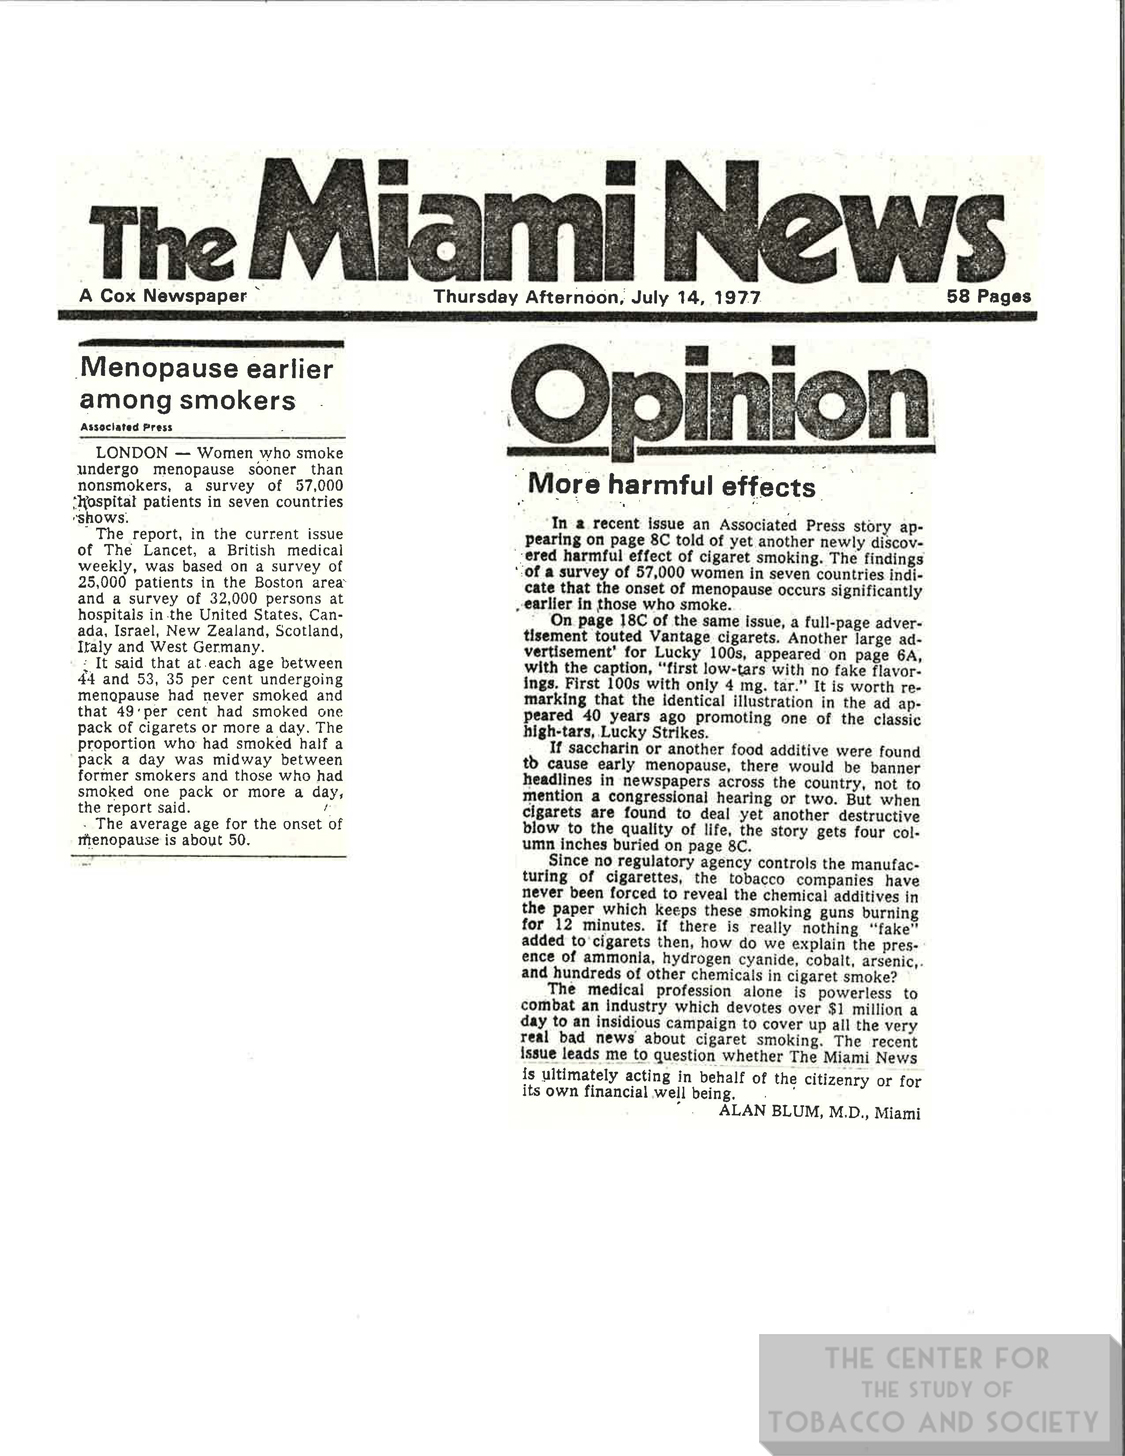 1977 Miami News More Harmful Effects AB Article